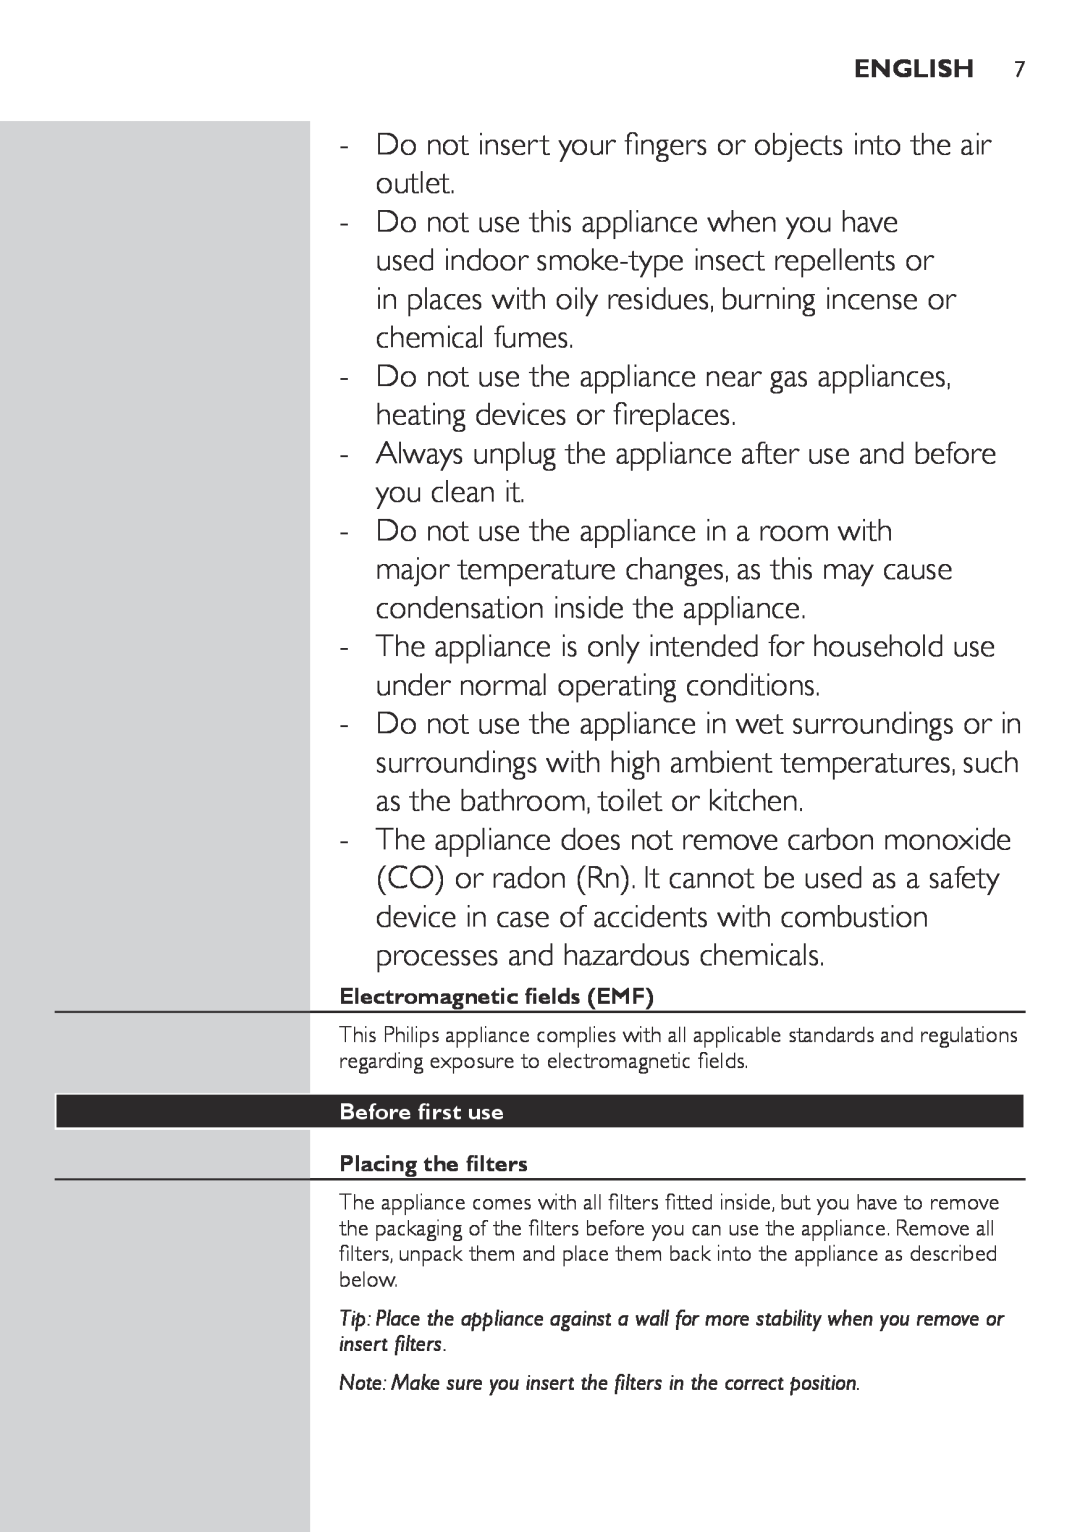 Philips AC4074, AC4072 user manual Electromagnetic fields EMF, Before first use, Placing the filters 